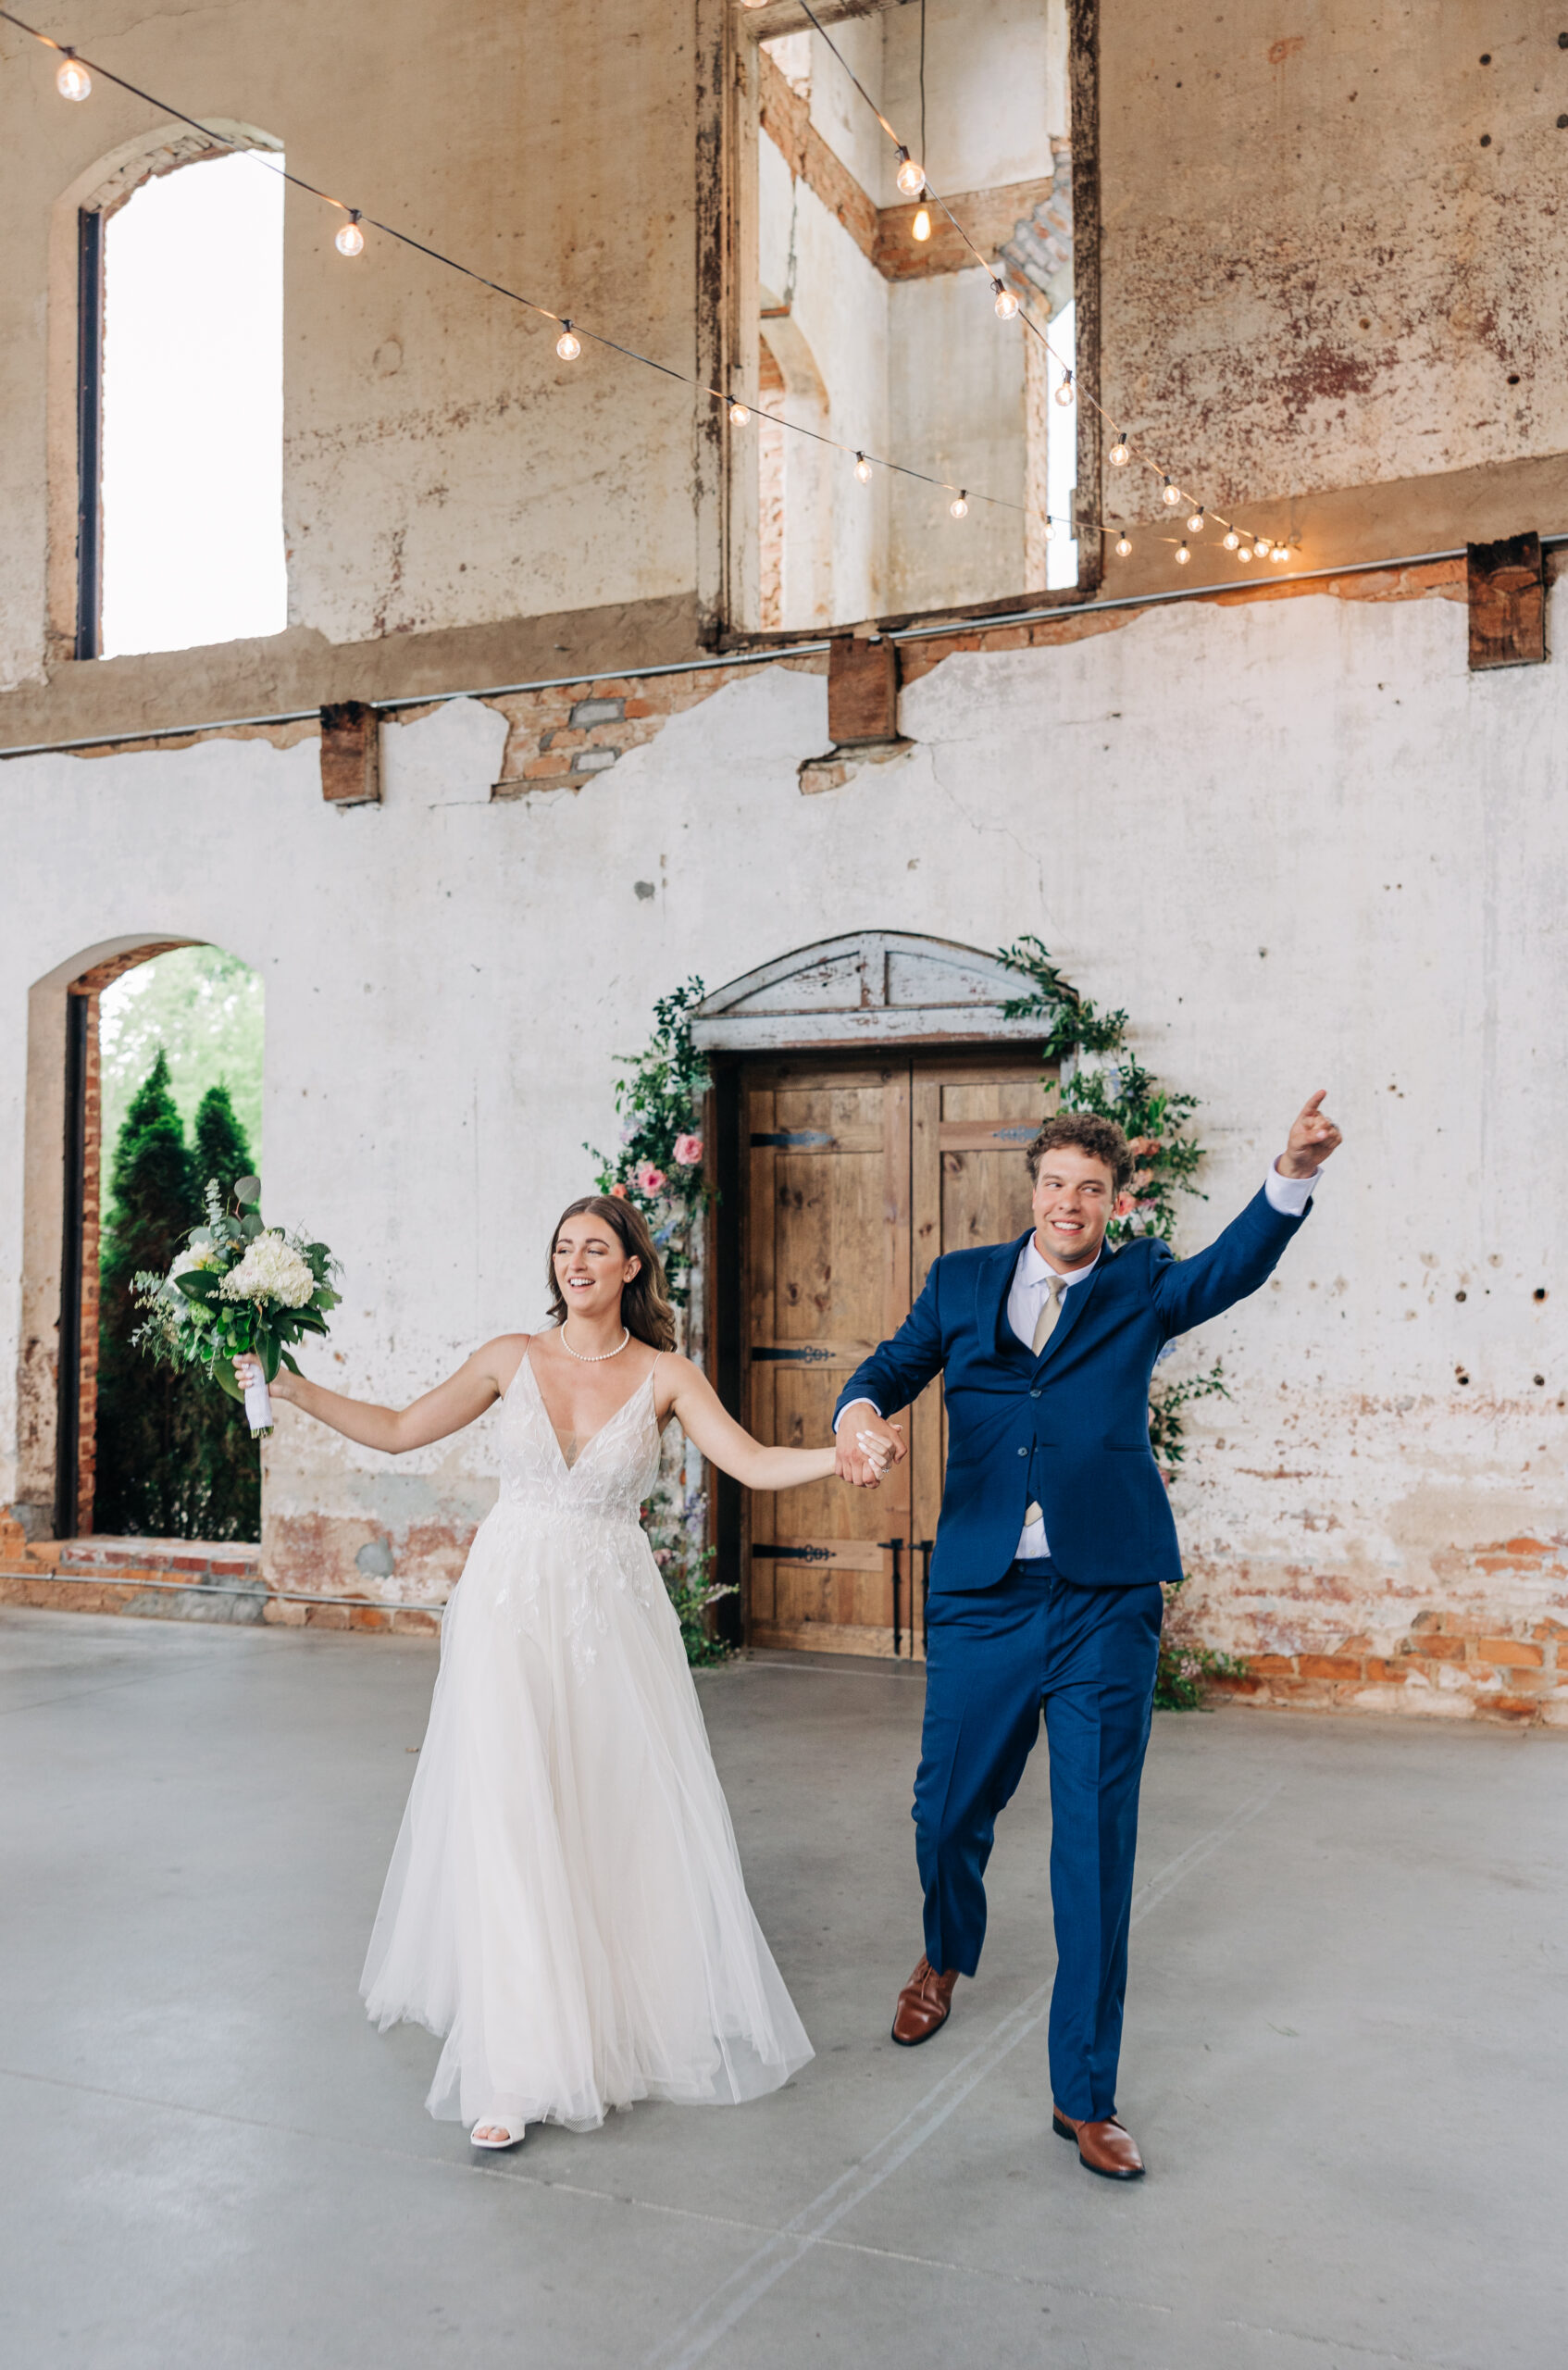 A bride and groom in a lace dress and blue suit enter their wedding reception with arms up and big smiles